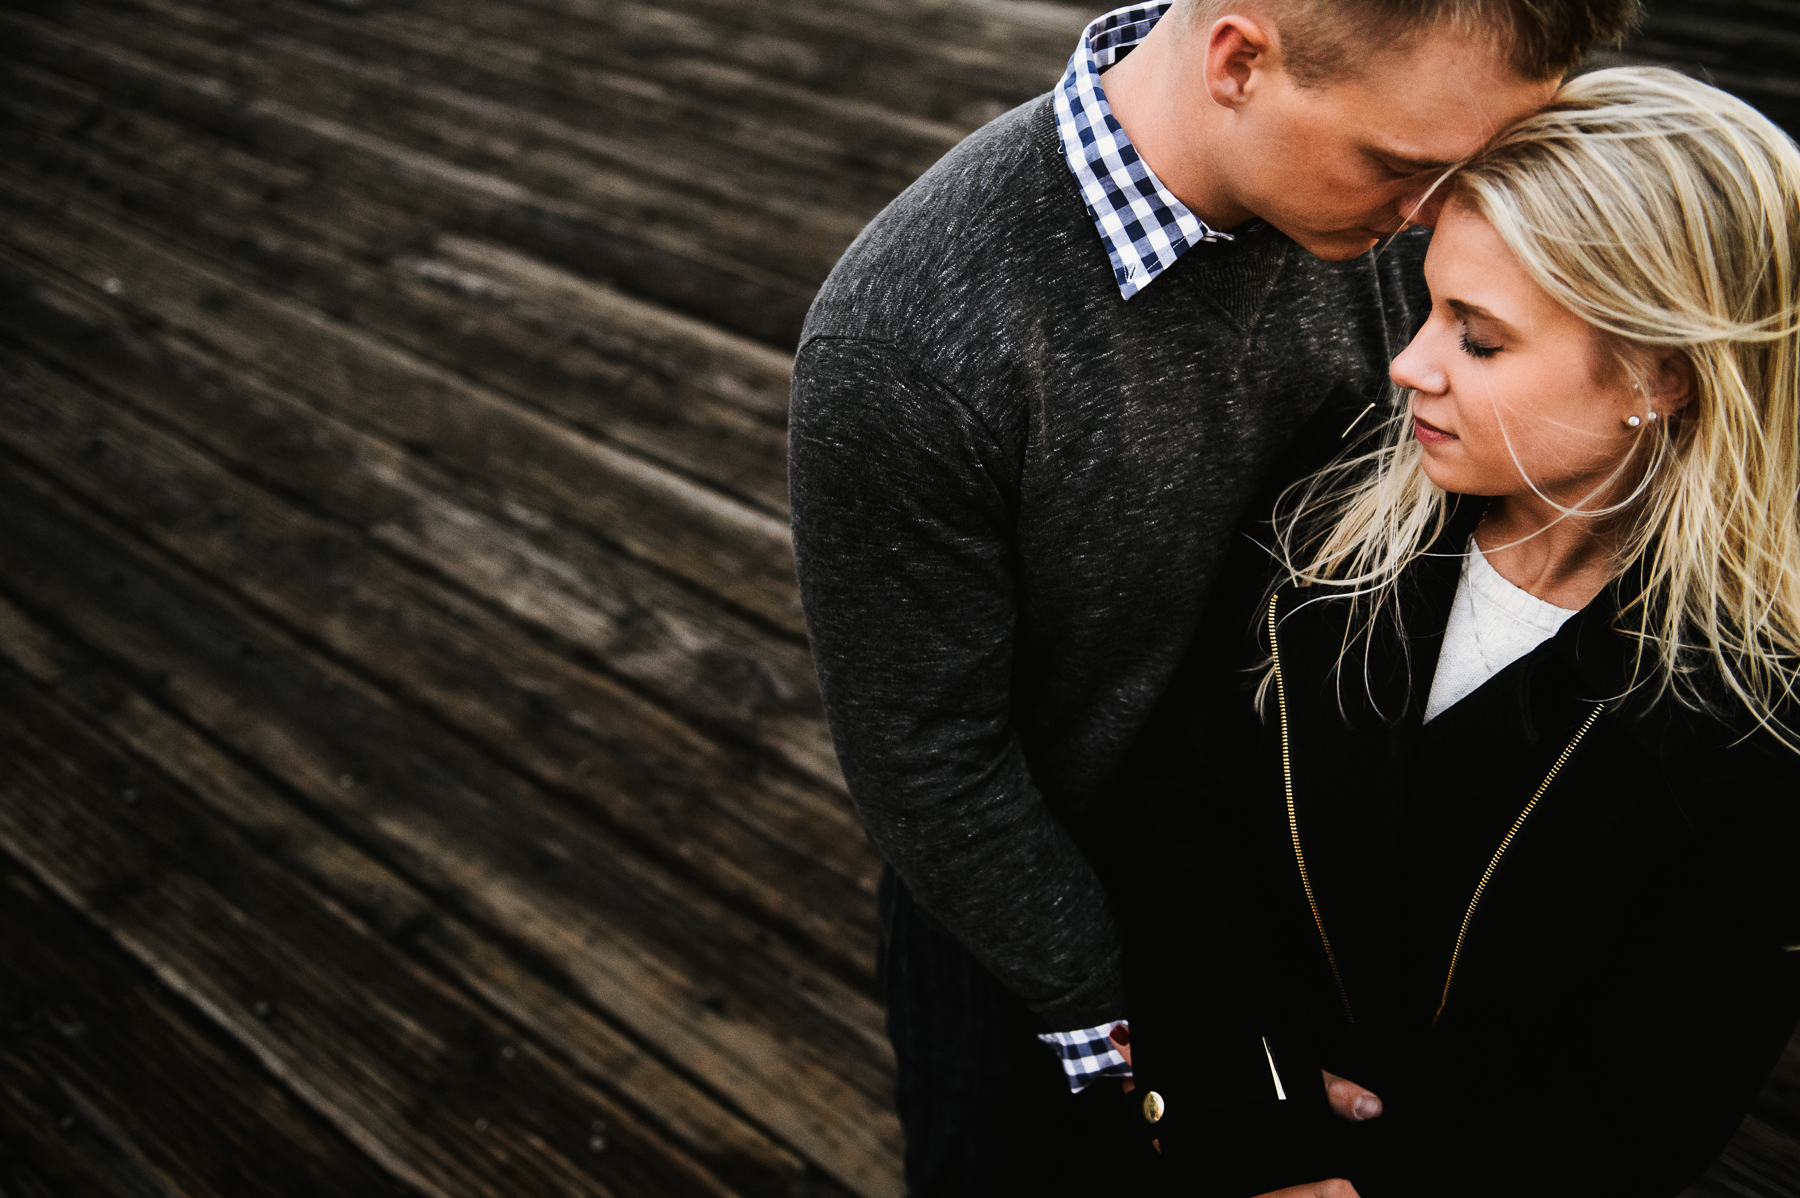 seattle-wedding-photographer-engagement-sessions-best-14